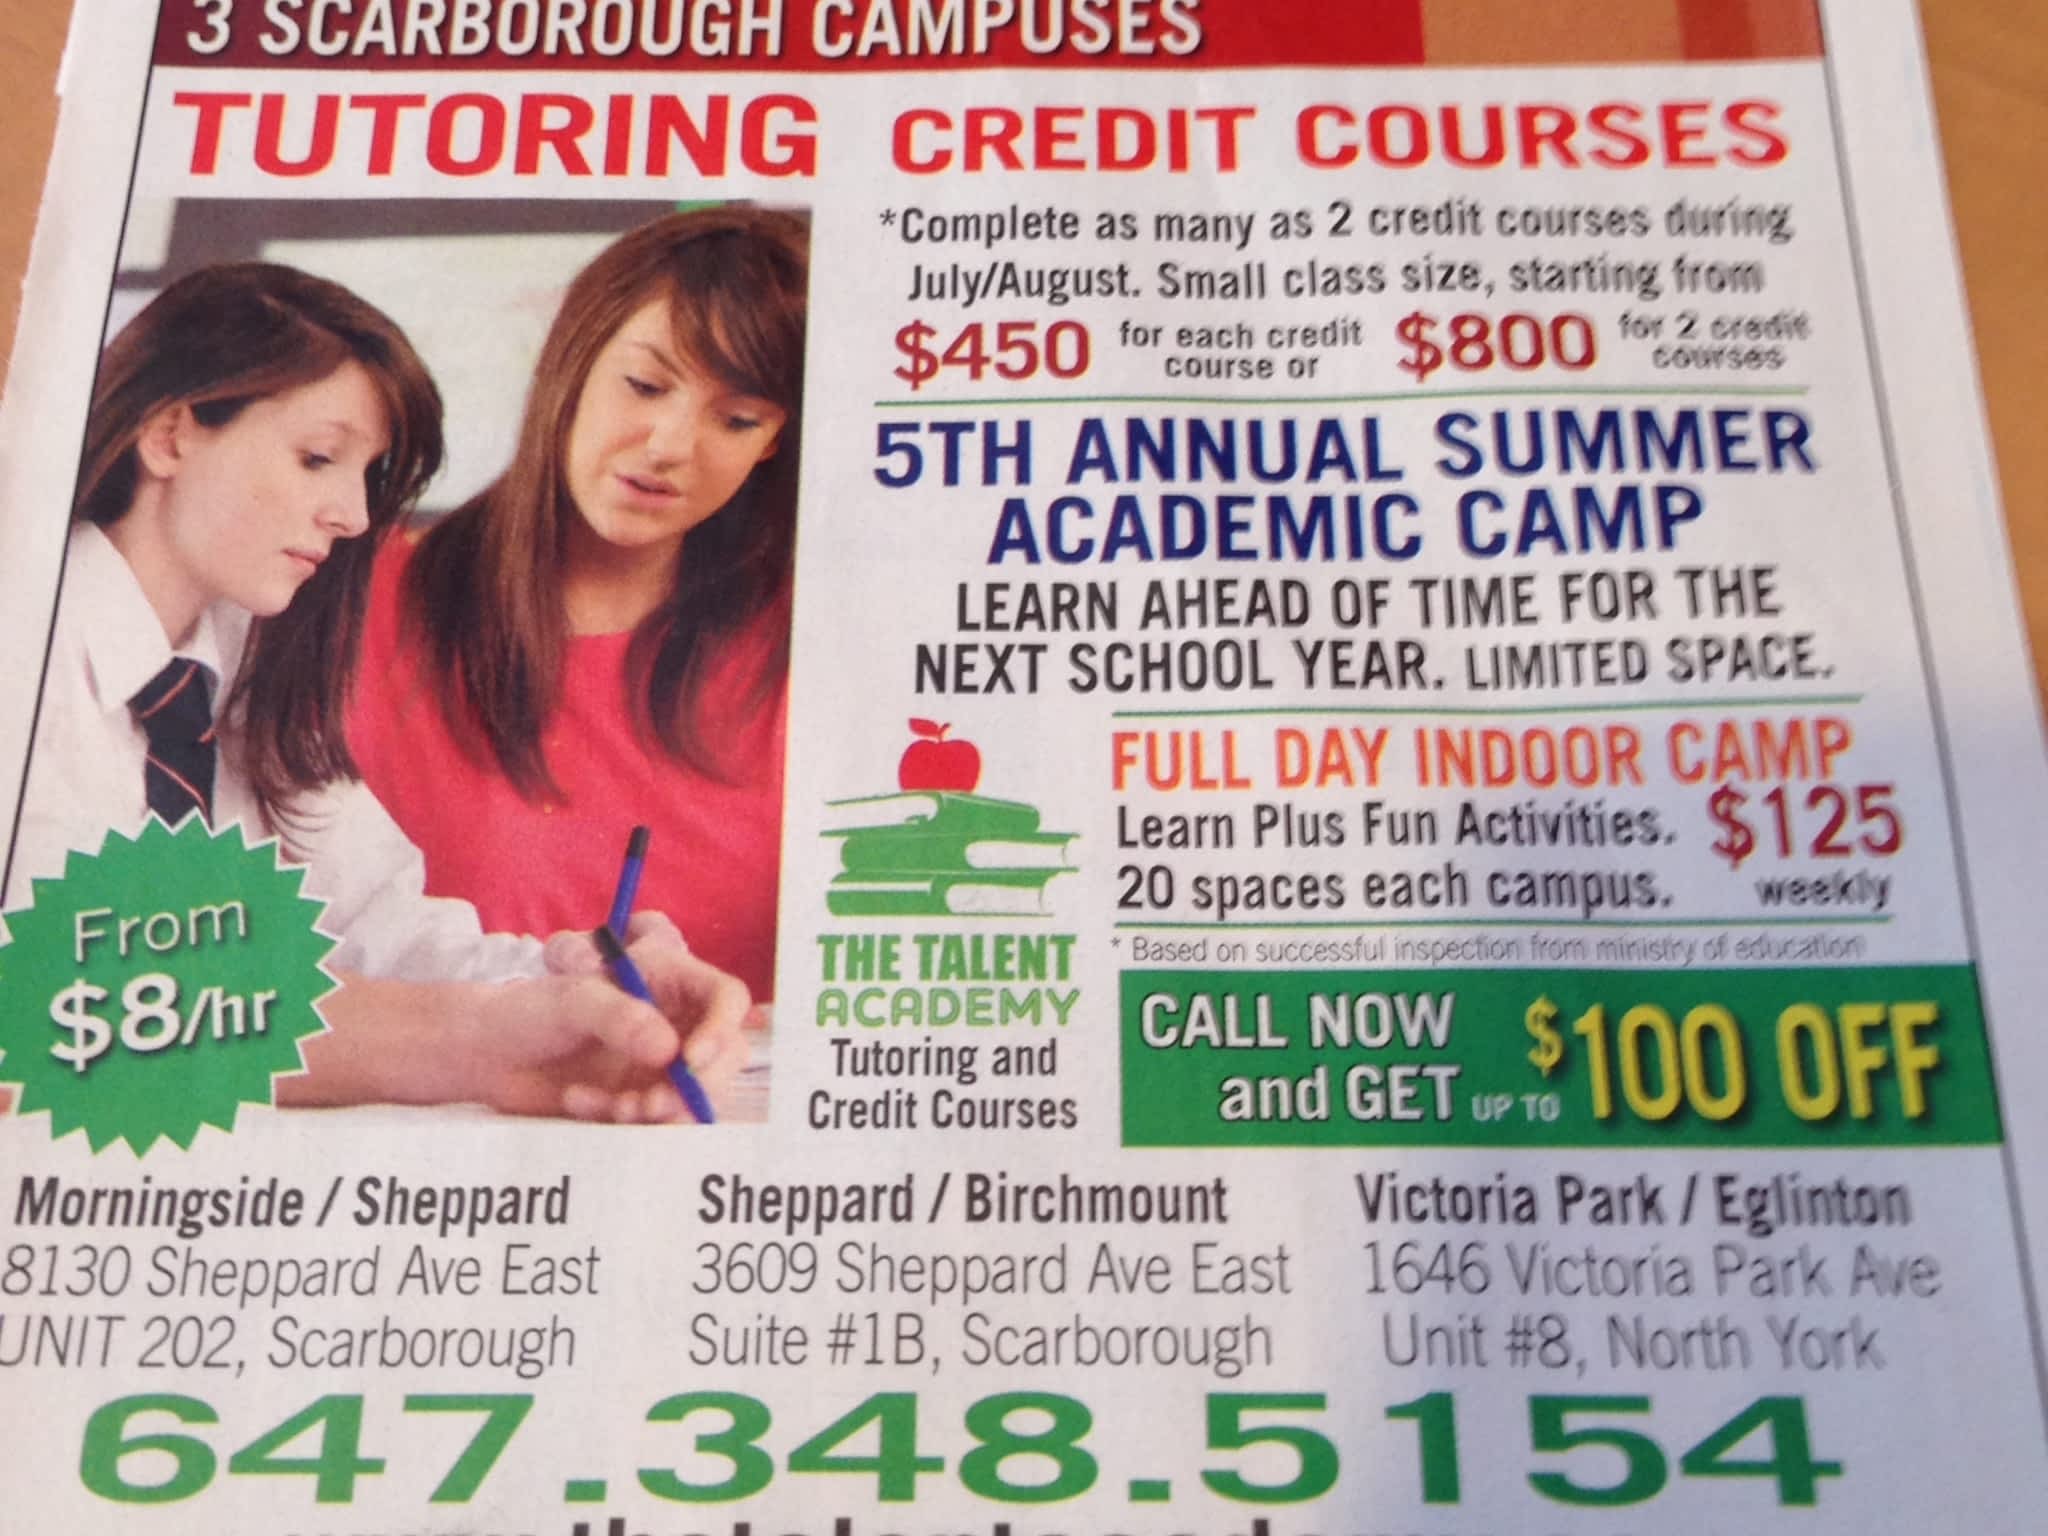 photo The Talent Academy Tutoring and Credit Courses